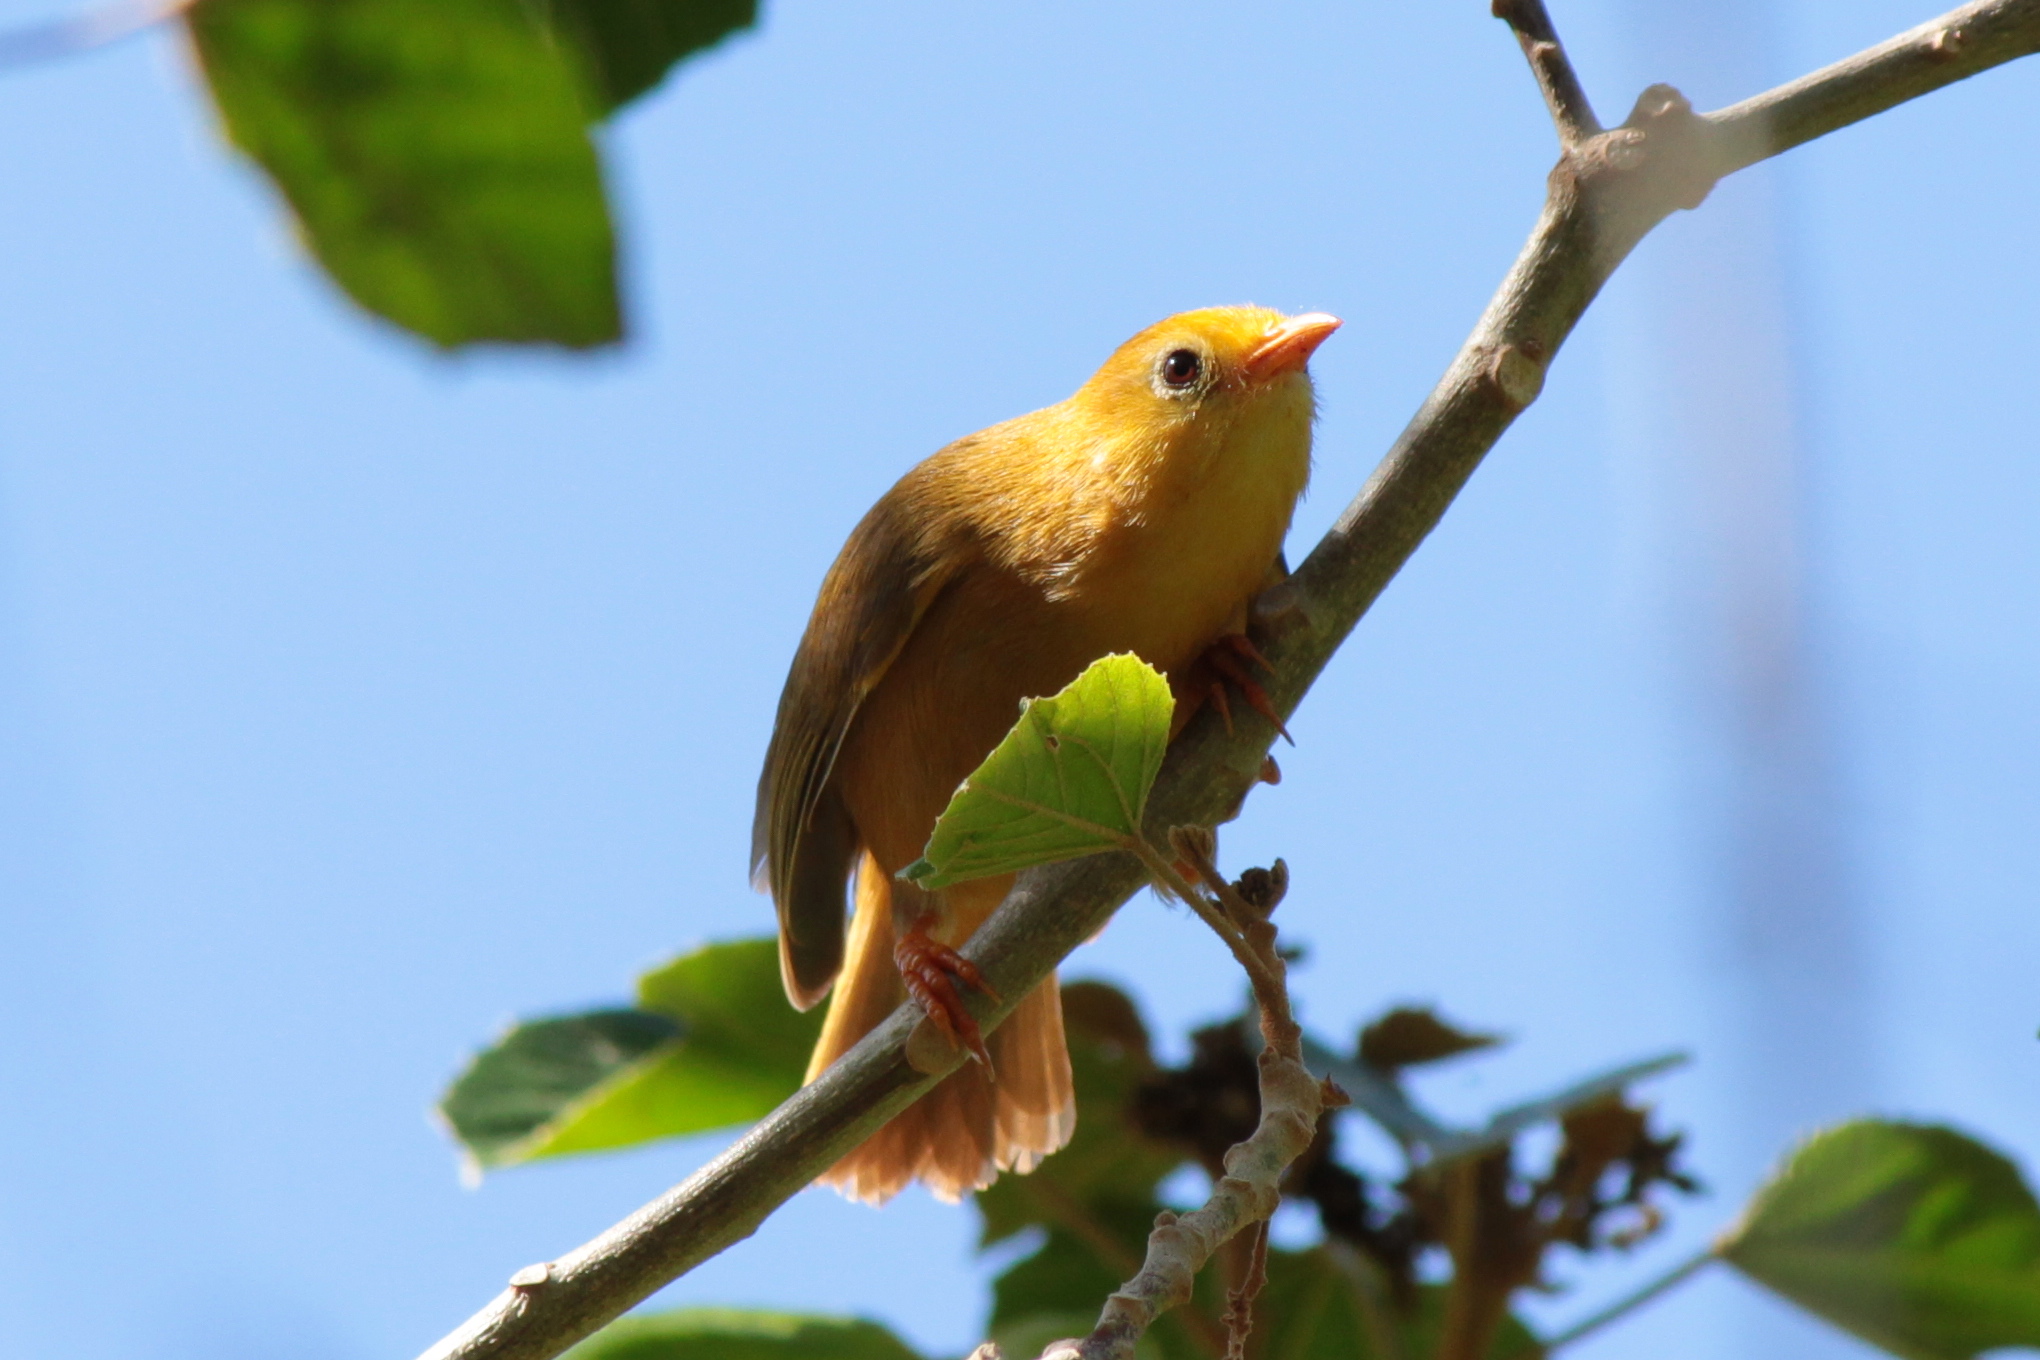 A Golden White-eye perched on a branch